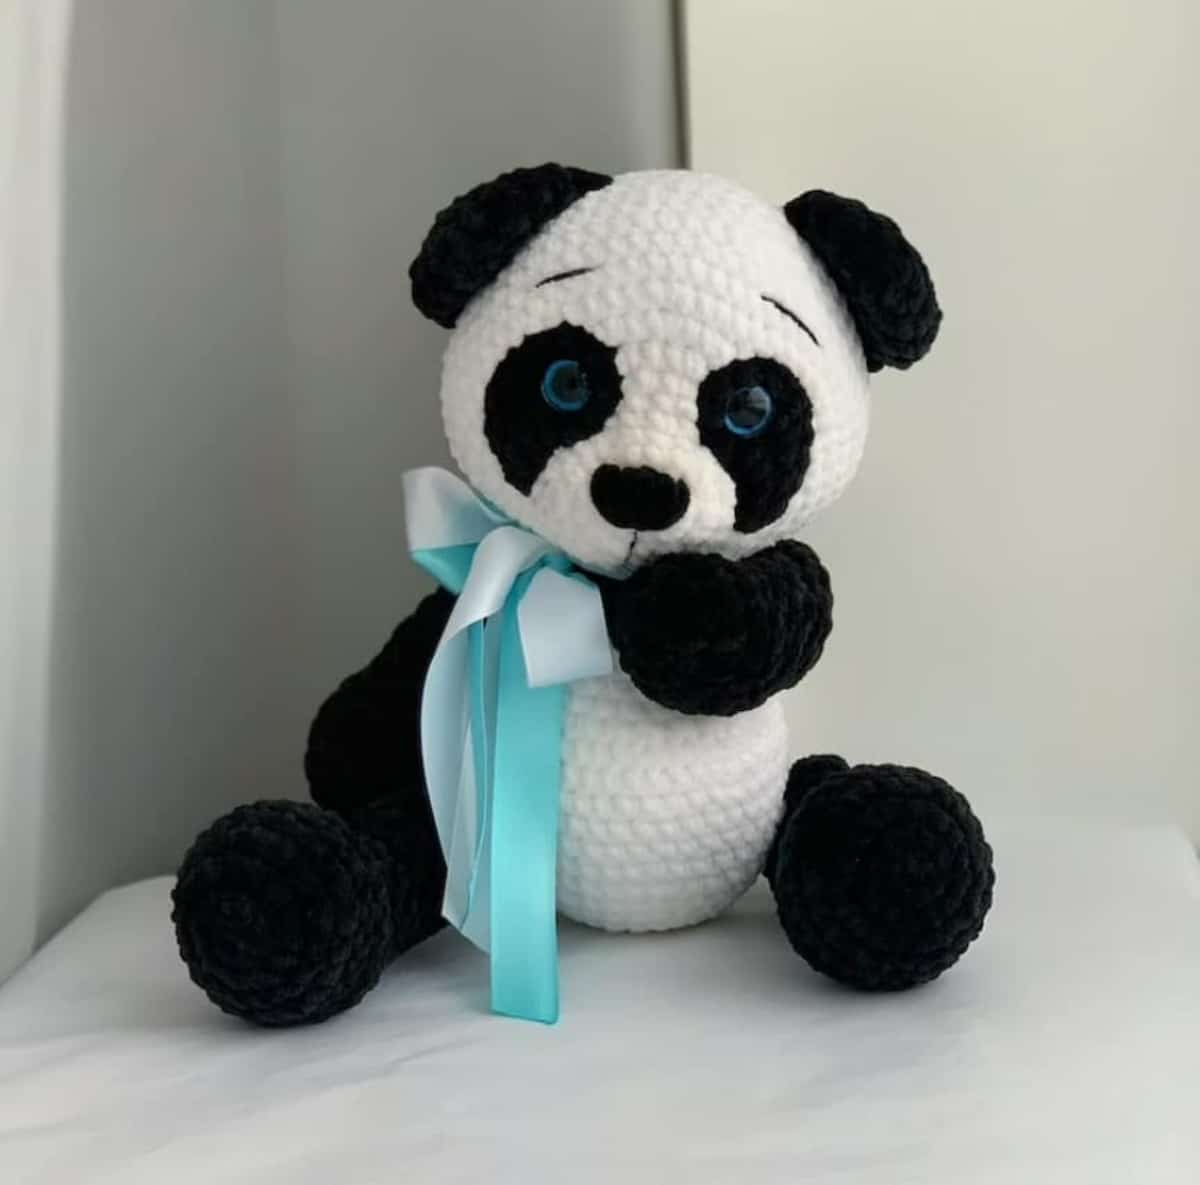 Stuffed crochet black and white panda bear on a white background with a silky blue and white bow around his neck.